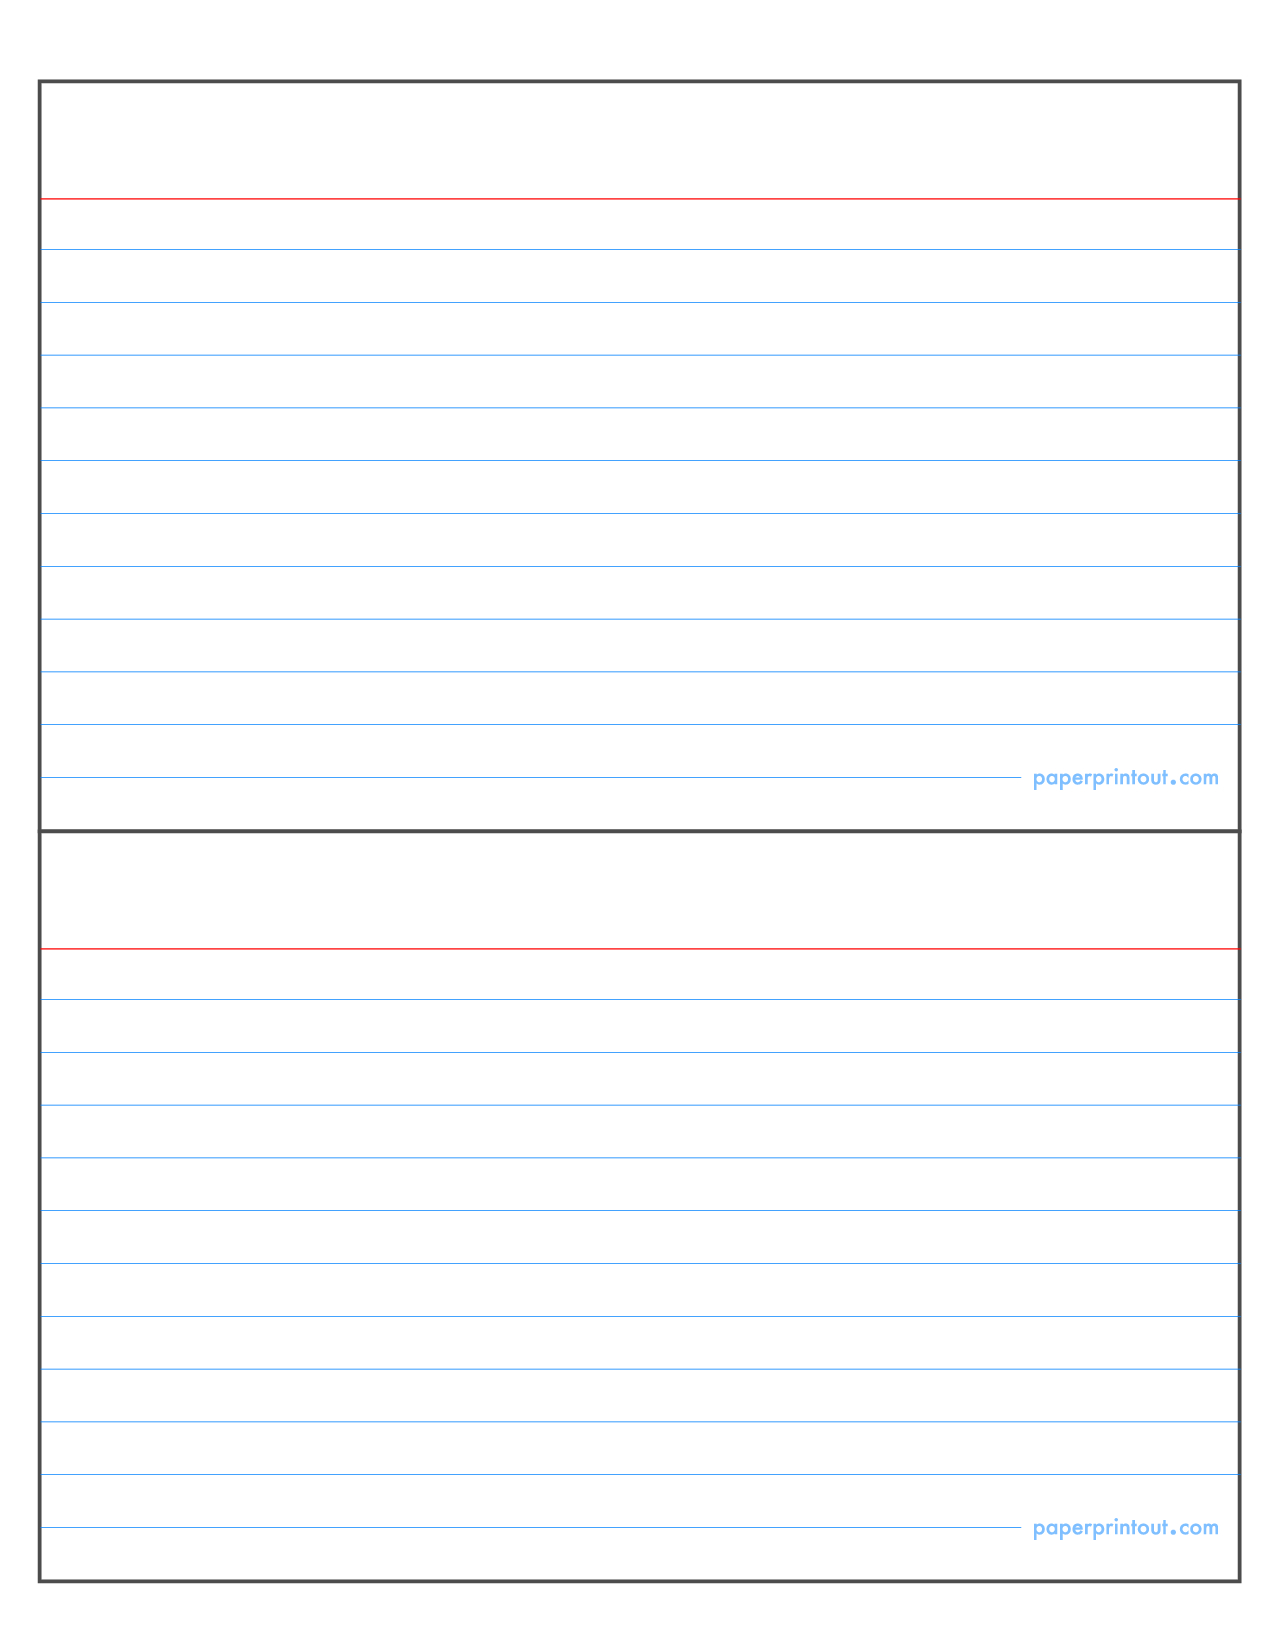 Index Card Template | E Commercewordpress With Regard To Word Template For 3X5 Index Cards